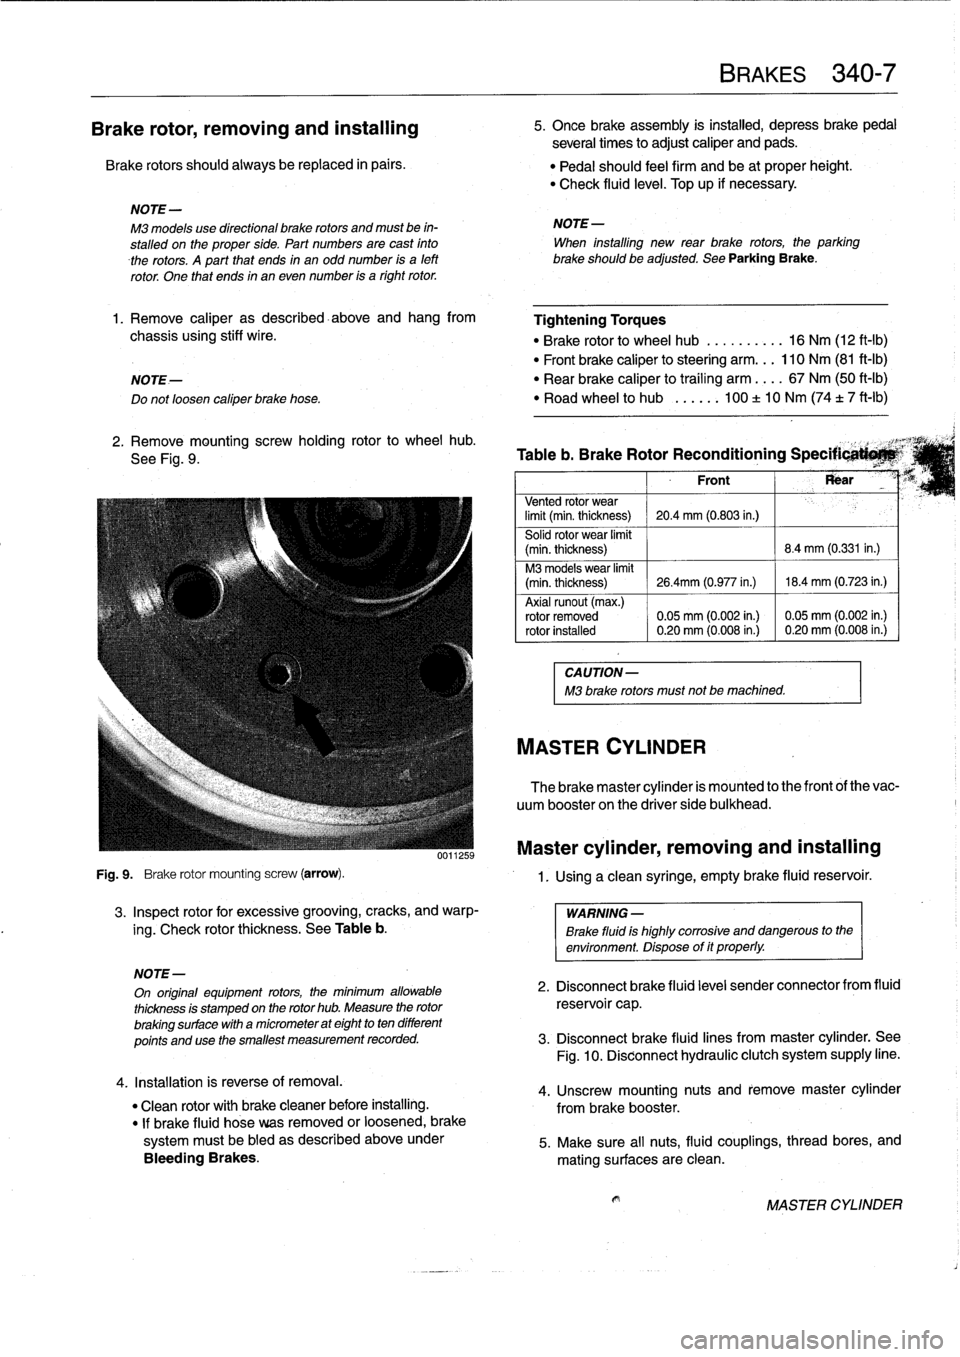 BMW 323i 1995 E36 Owners Guide 
Brake
rotor,
removing
and
installing

Brake
rotors
shouldalways
be
replaced
in
pairs
.

Fig
.
9
.

	

Brake
rotor
mounting
screw
(arrow)
.

3
.
Inspect
rotor
for
excessive
grooving,
cracks,
and
warp-